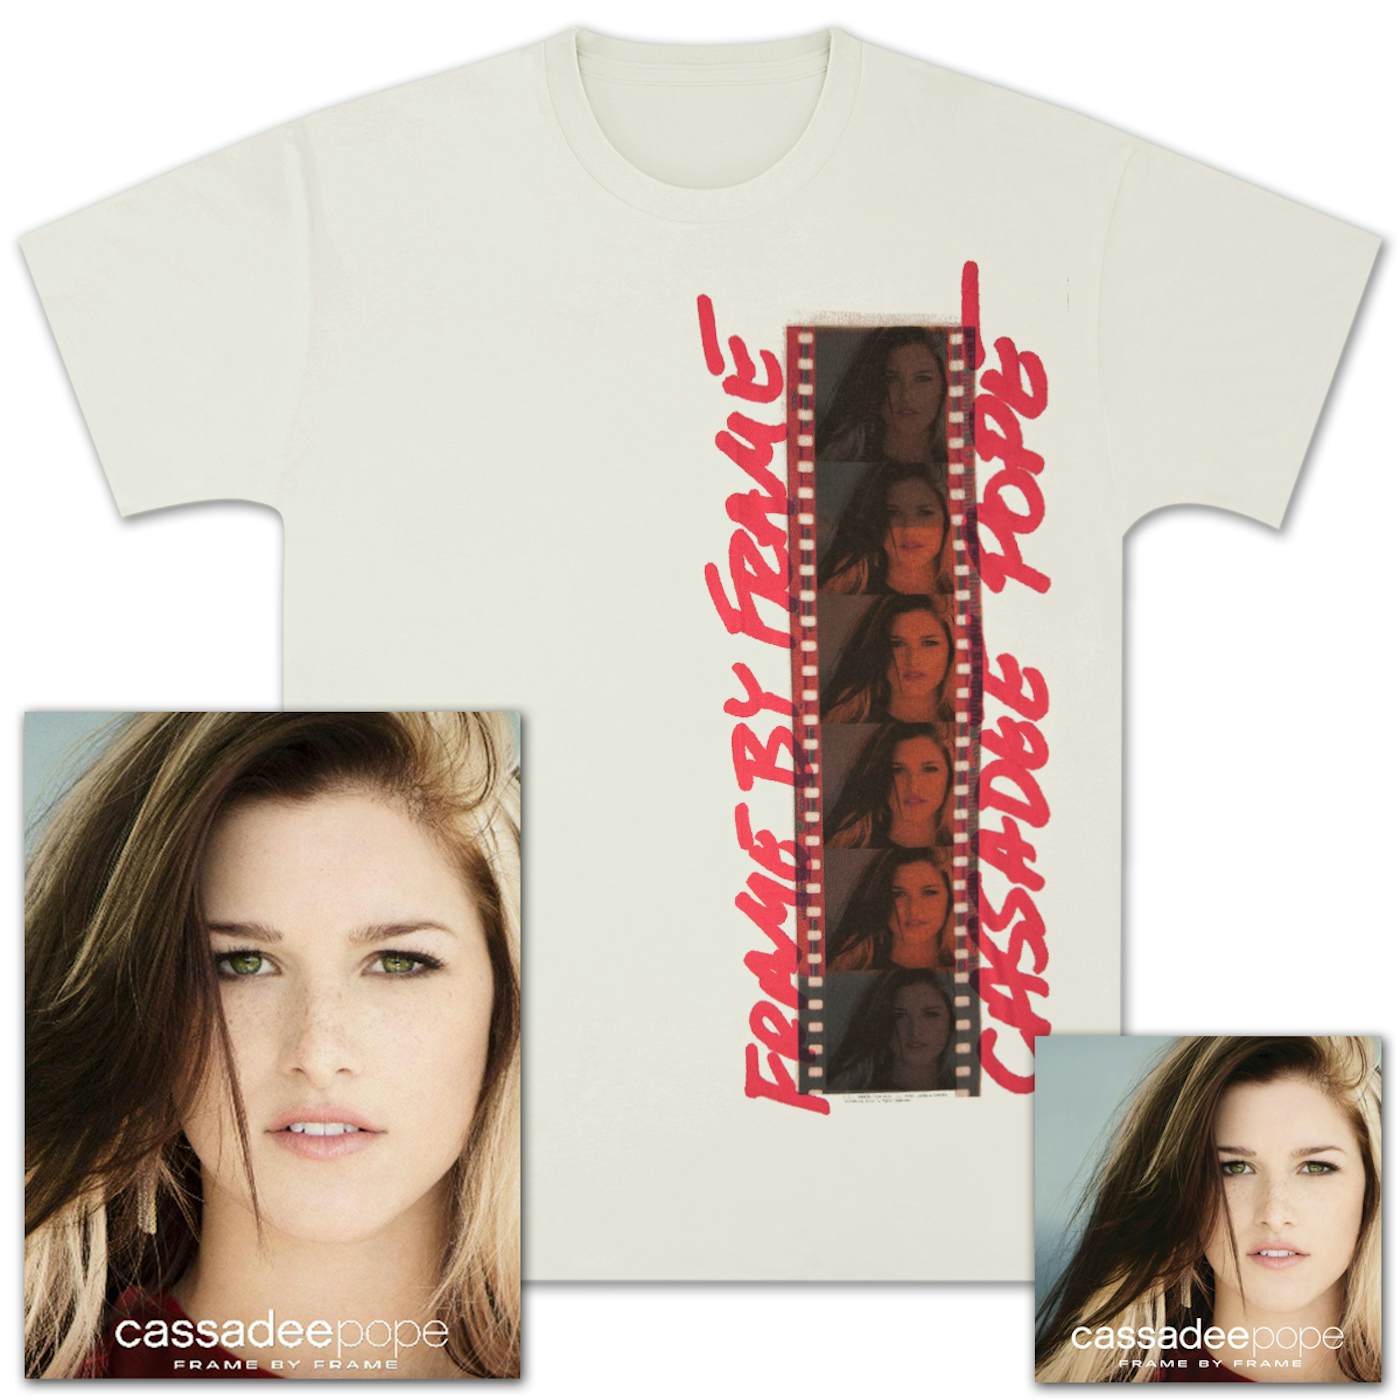 Cassadee Pope Frame By Frame Deluxe Bundle